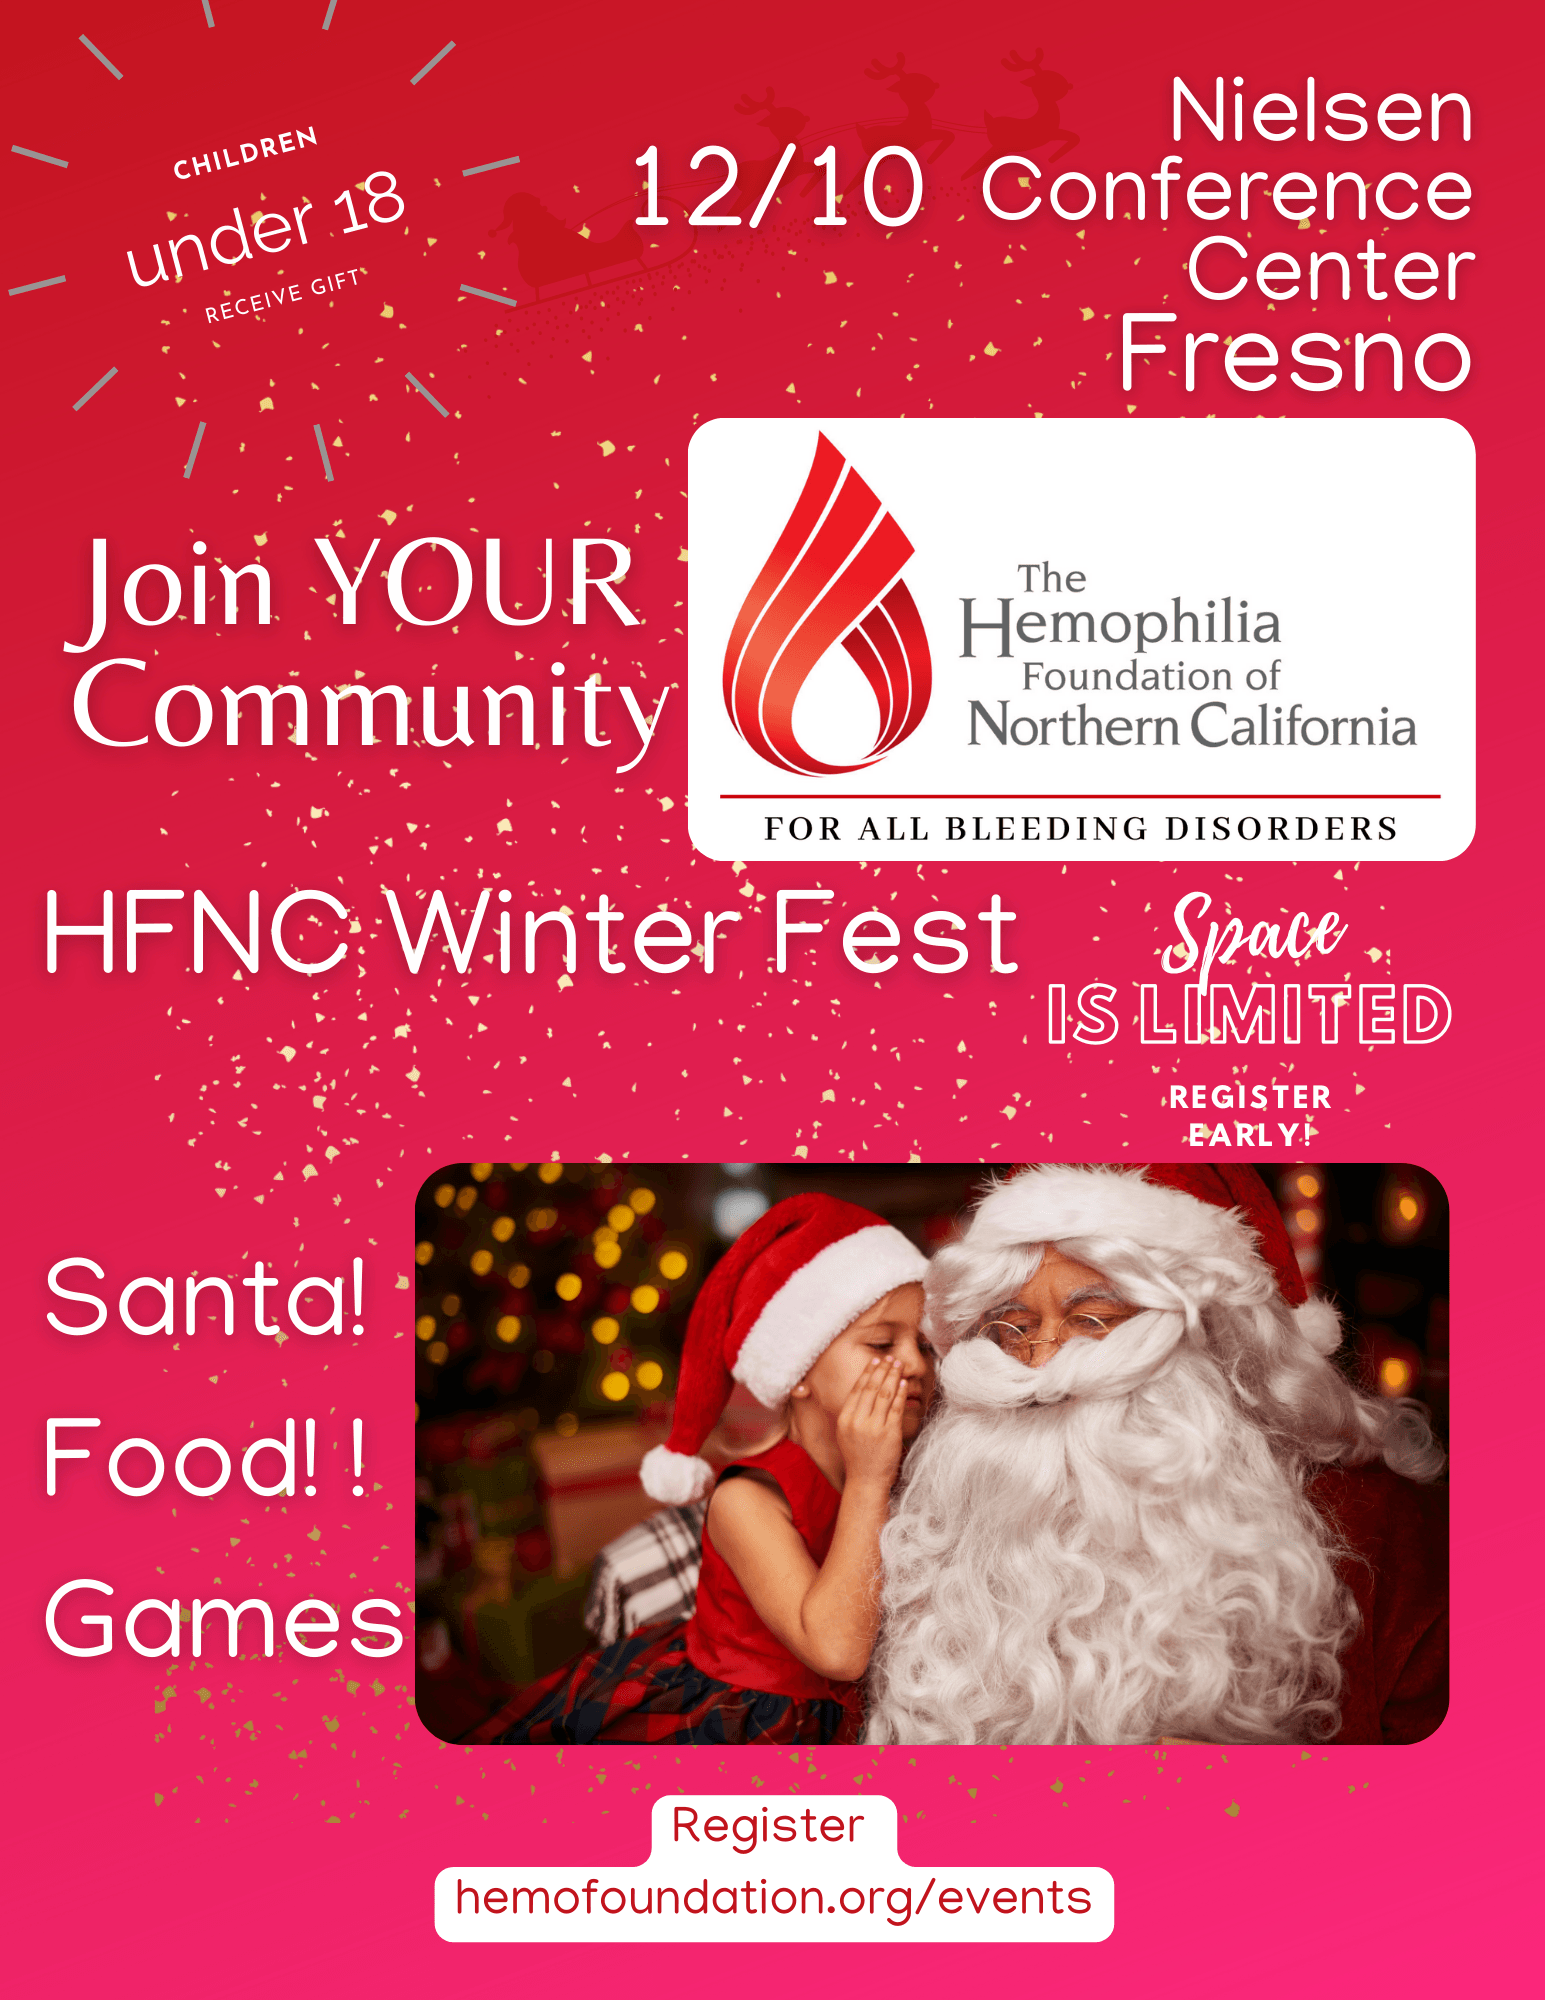 Child whispers in Santa's ear; text describes event details and registration information and shows HFNC logo